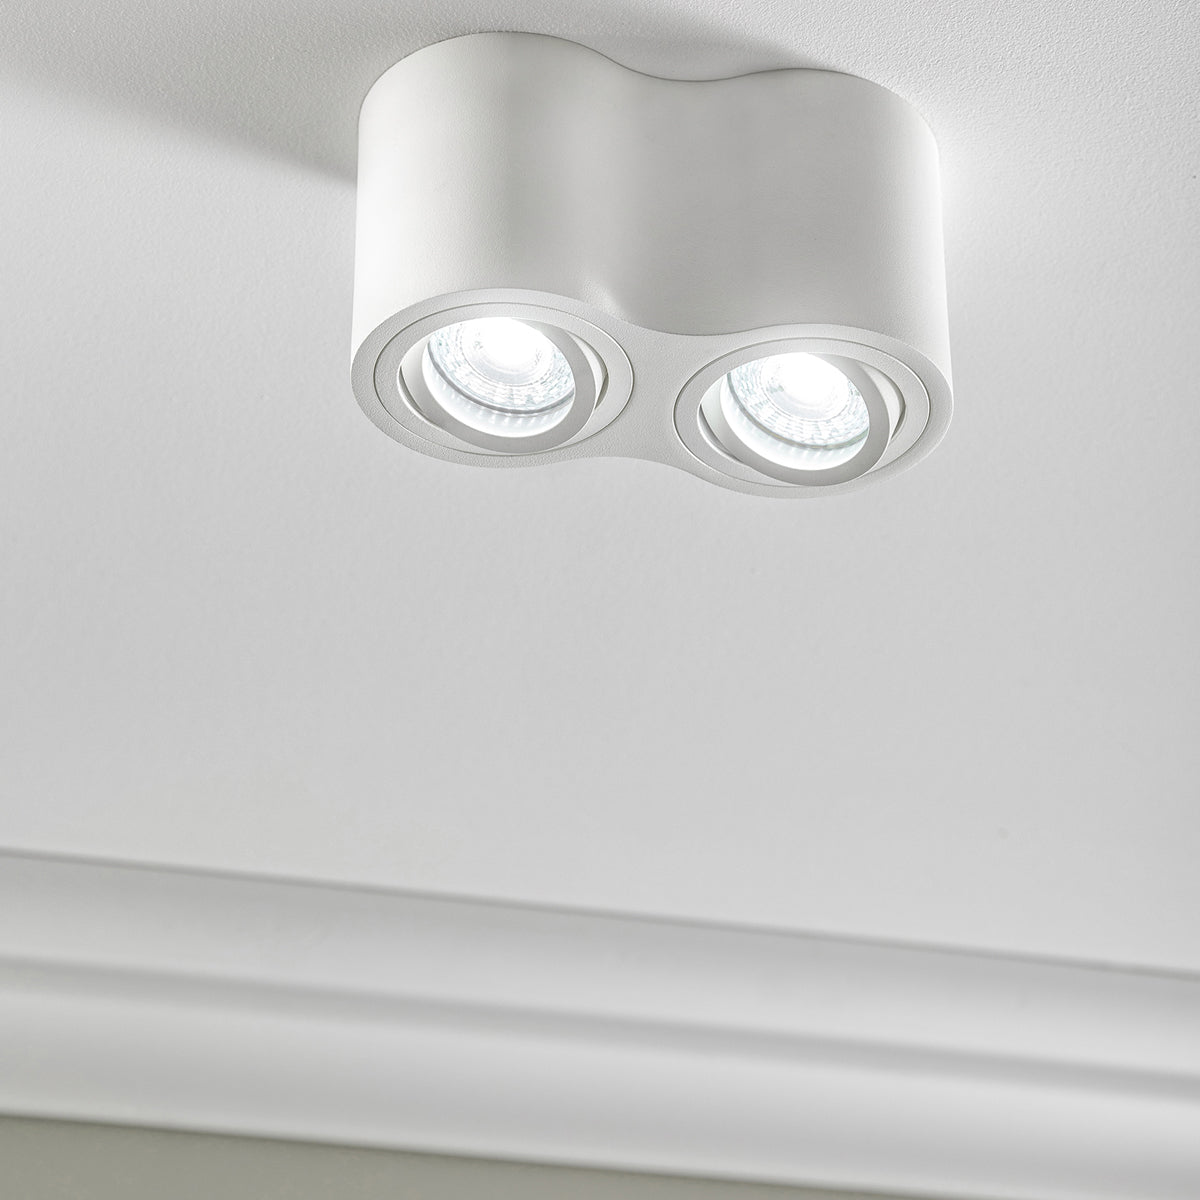 We combine practicality with atmosphere, the result is the Sasha series. These double universal spots can be used wherever you would like. The sleek design will feel like a fits perfectly with all interiors.  Rotating by 360 degrees and complete with a tilted function its allows you to get the desired light output exactly where you want the light to beam. These lights are made from a high quality aluminum and powder coated to an immaculate white finish.